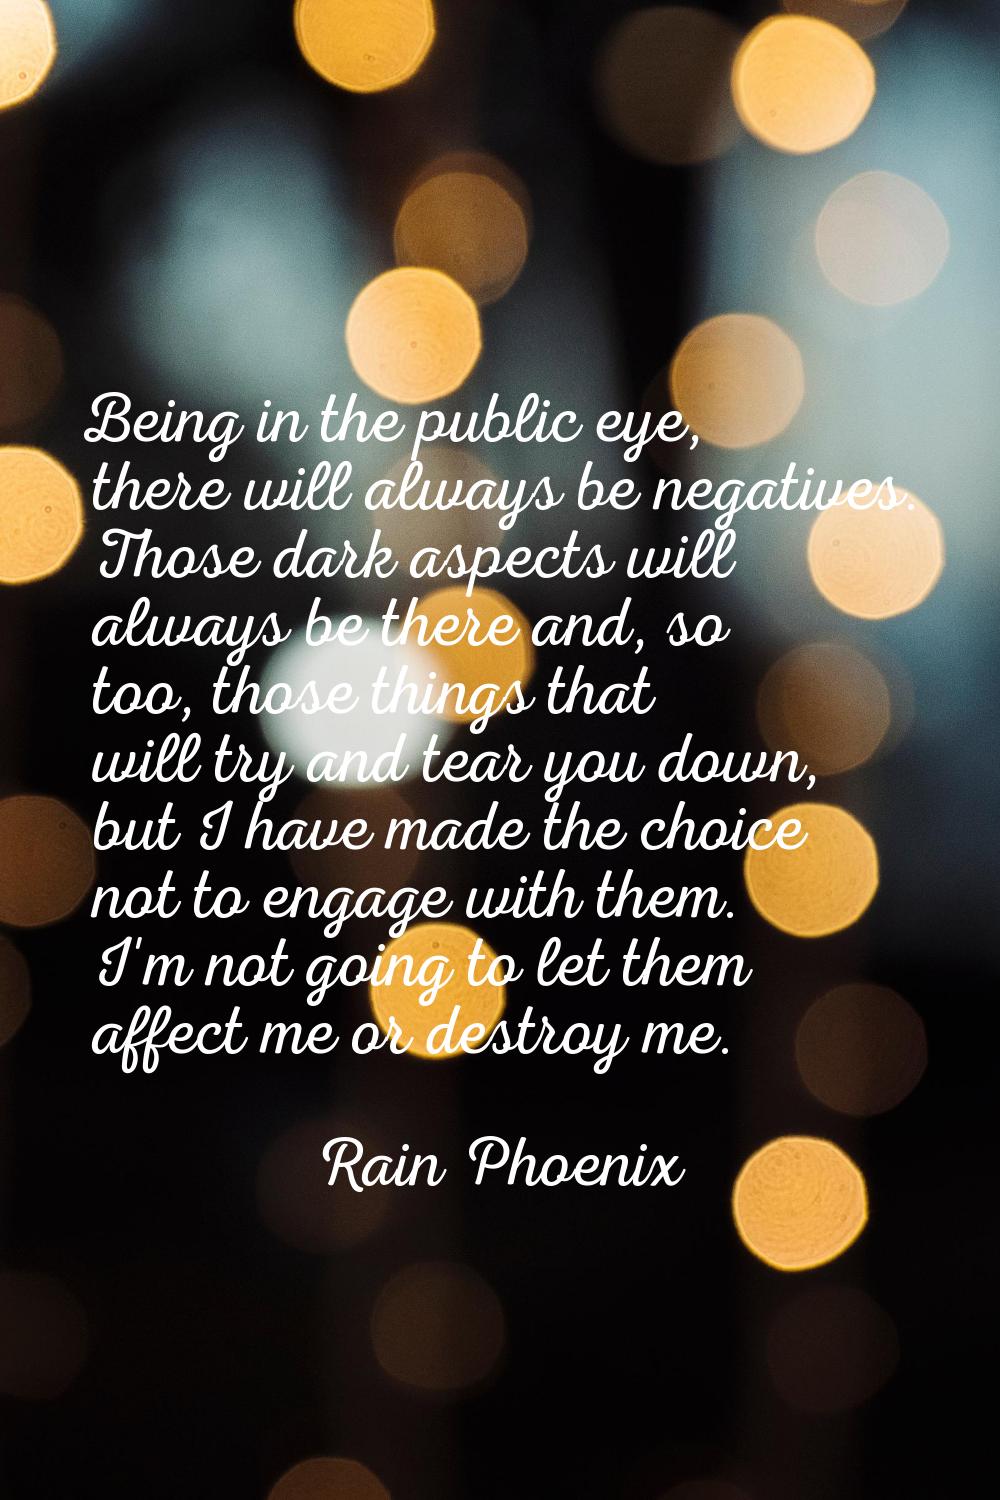 Being in the public eye, there will always be negatives. Those dark aspects will always be there an